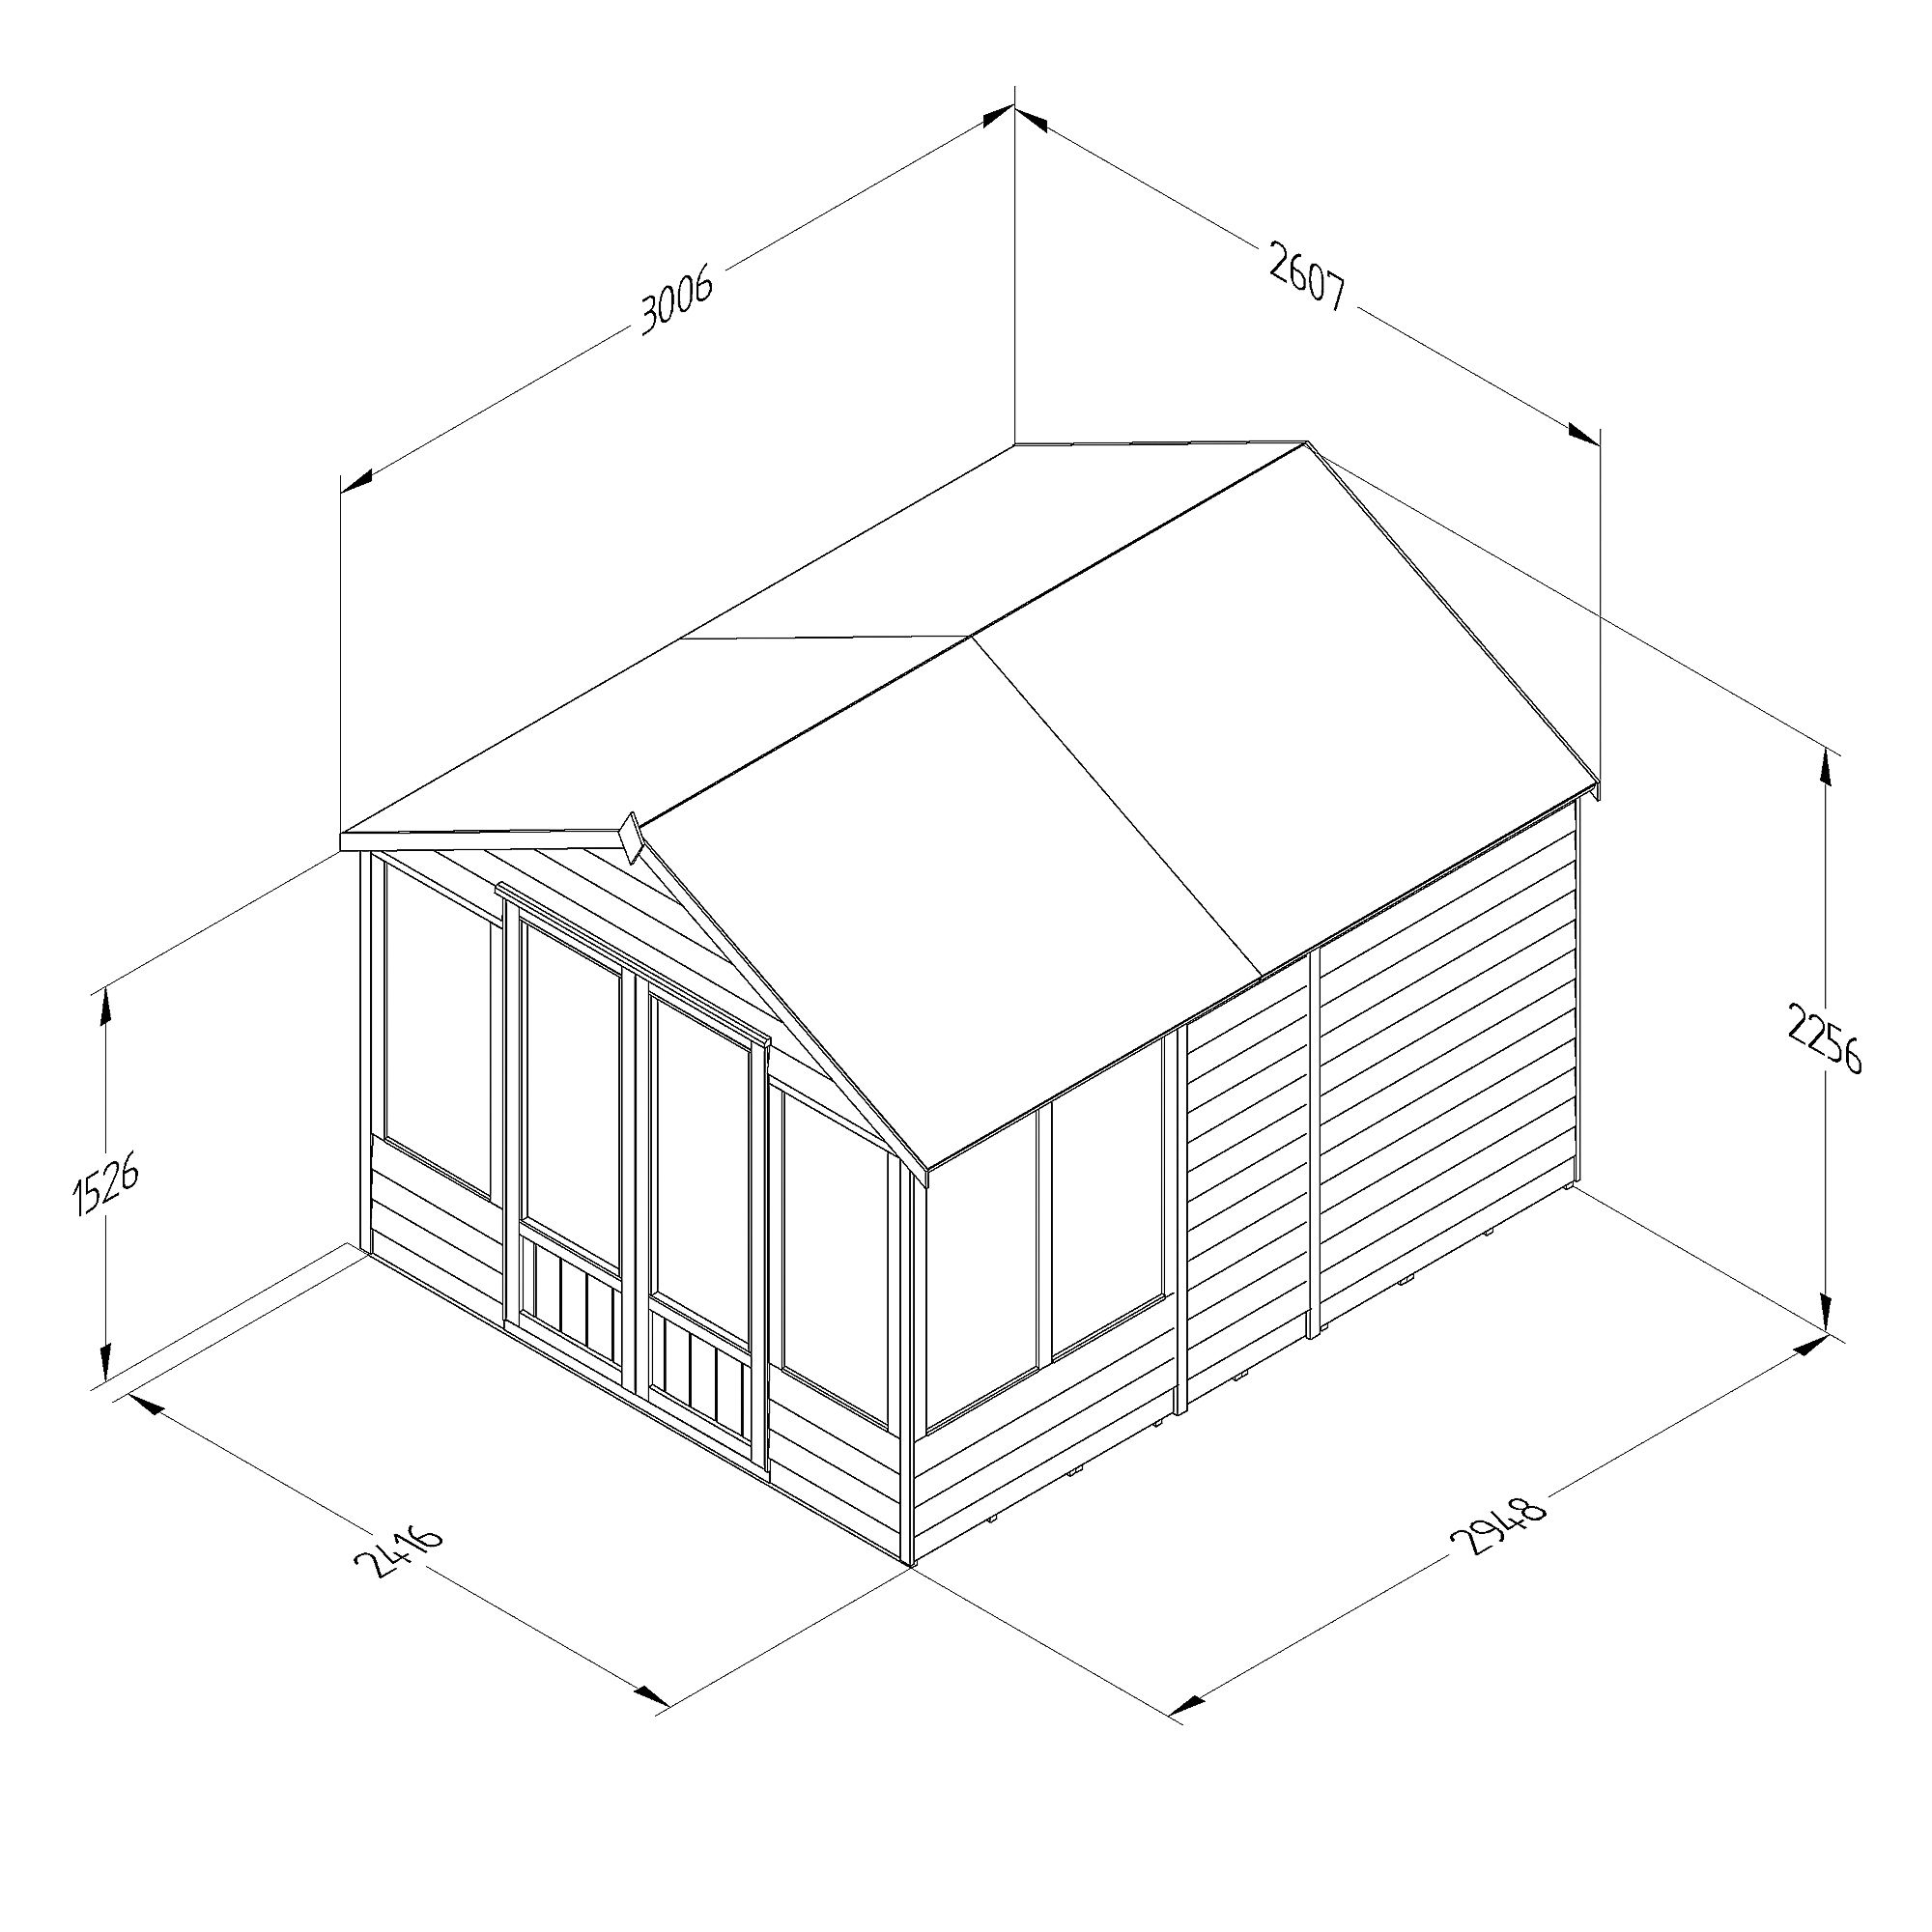 Forest Garden Oakley 10x8 ft with Double door & 6 windows Apex Solid wood Summer house (Base included)